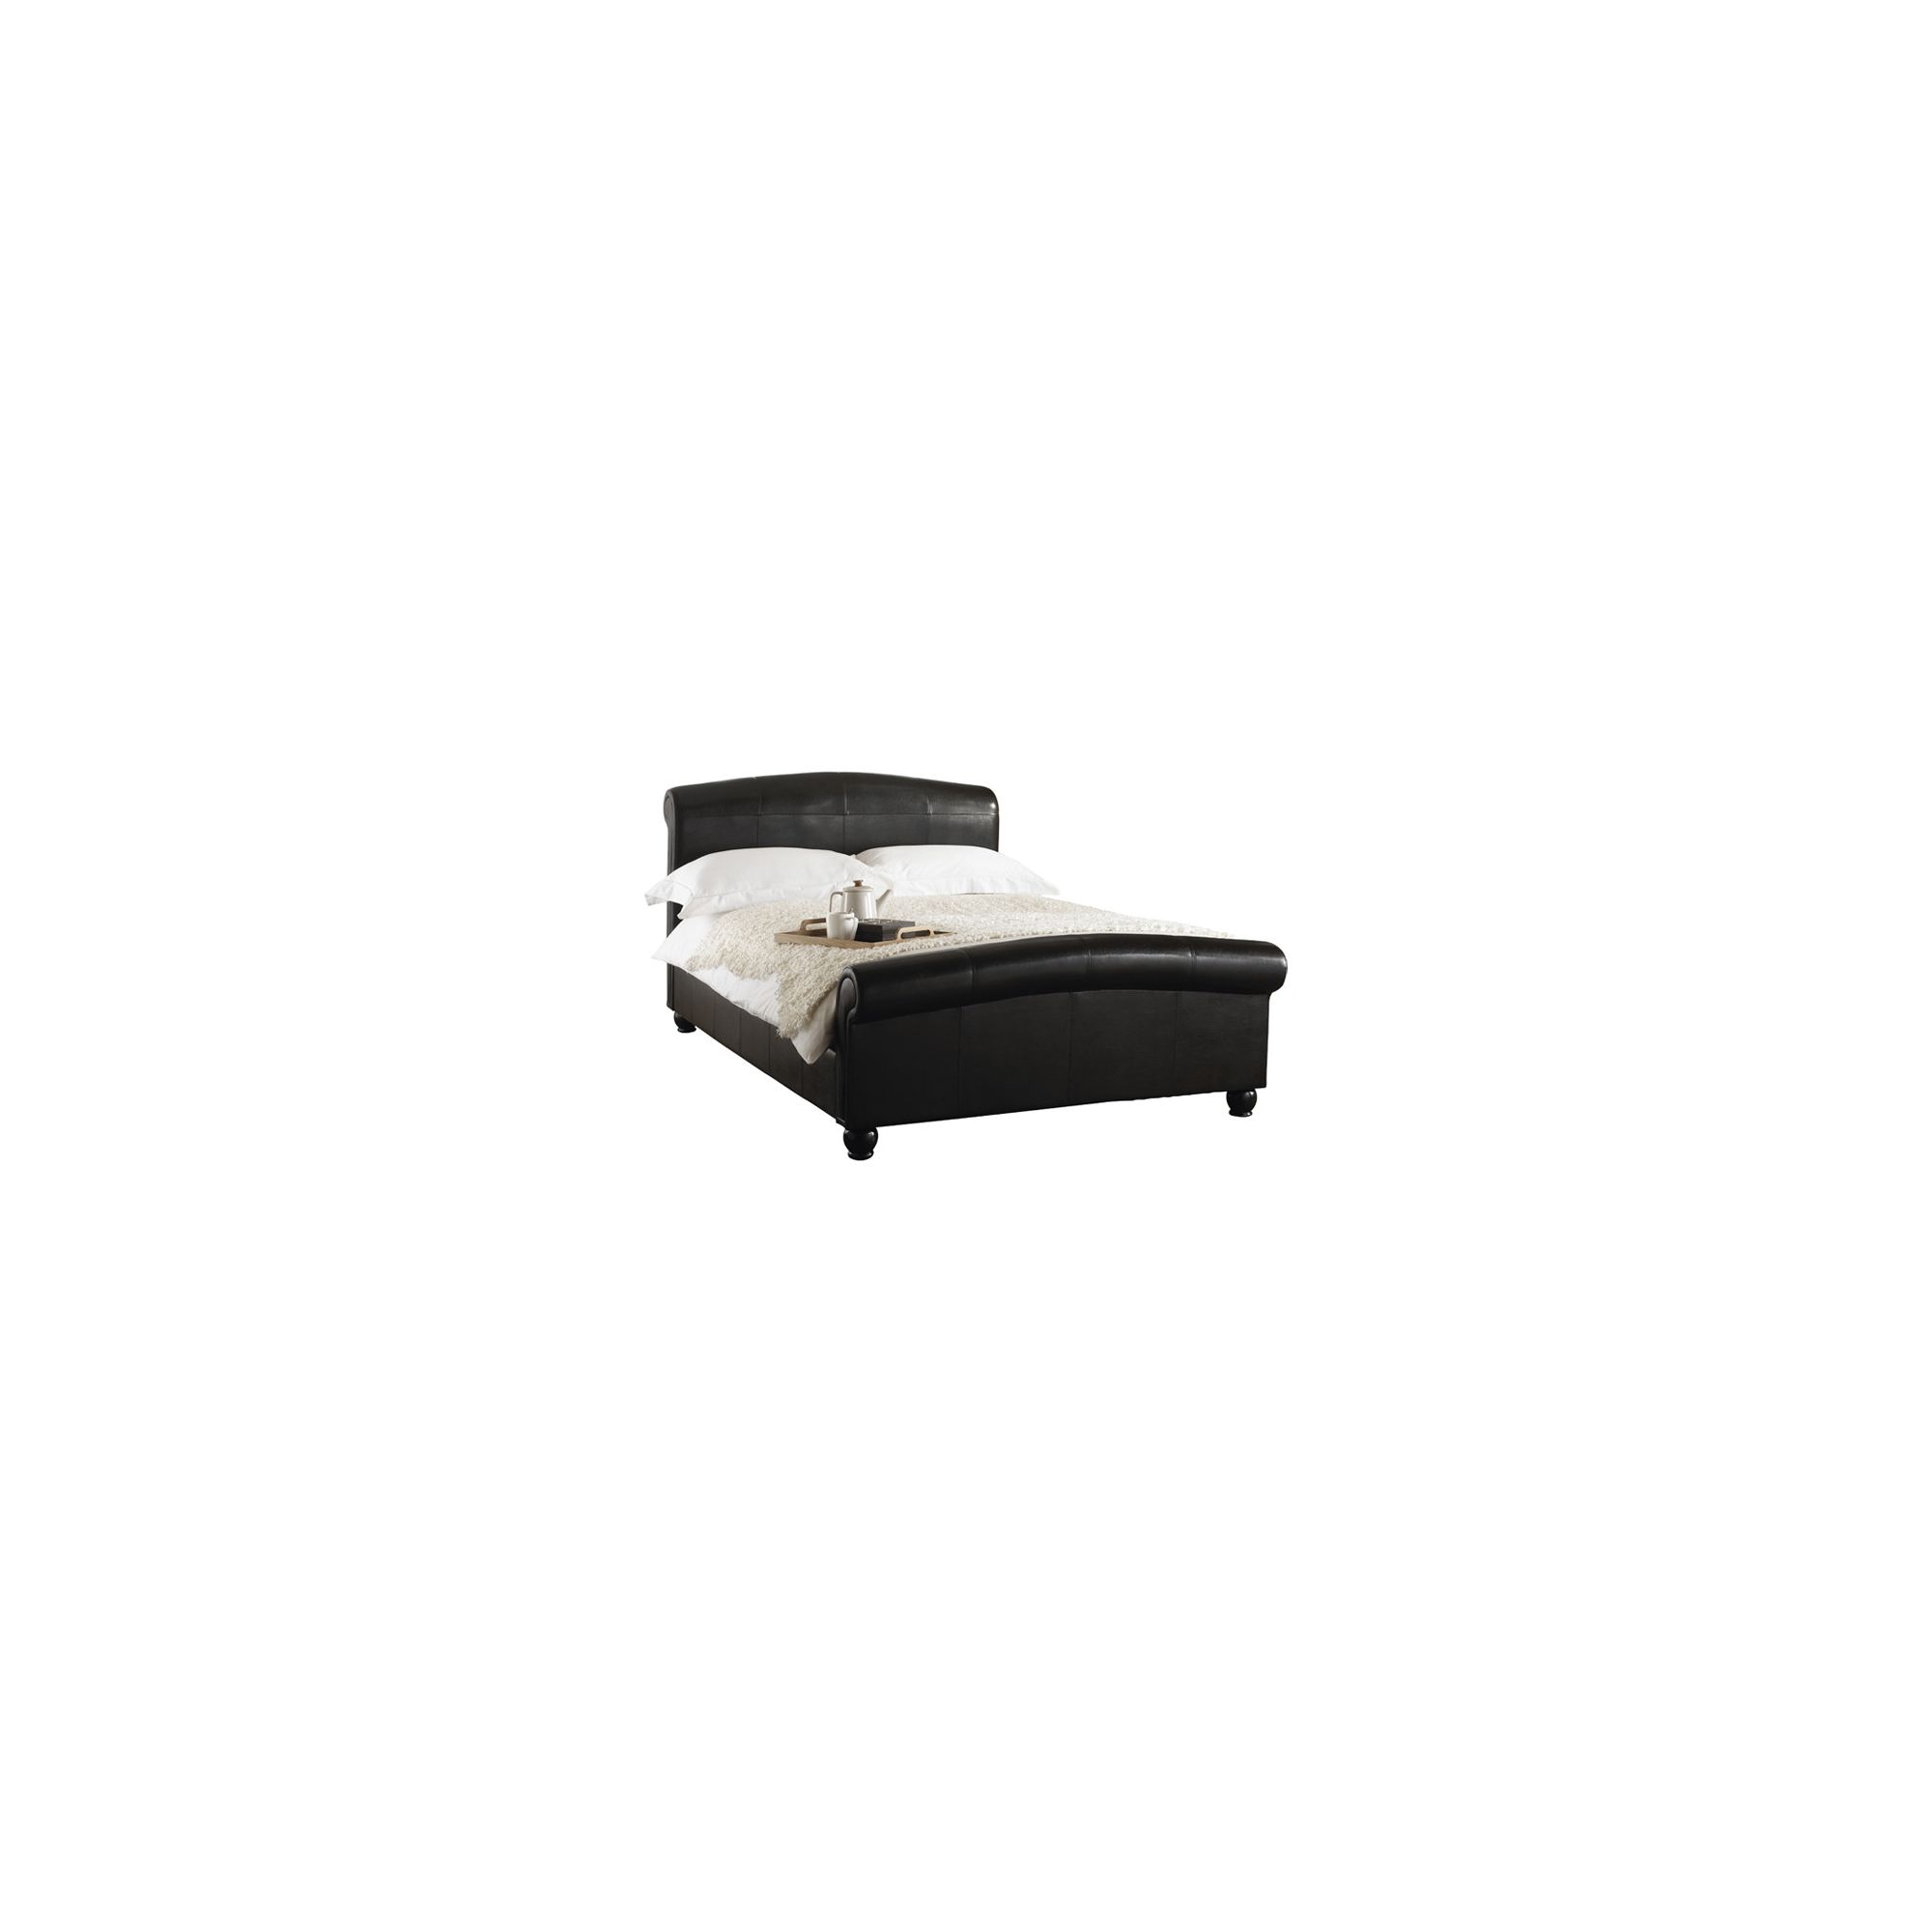 Hyder Knightsbridge Faux Leather Bed - Double at Tesco Direct